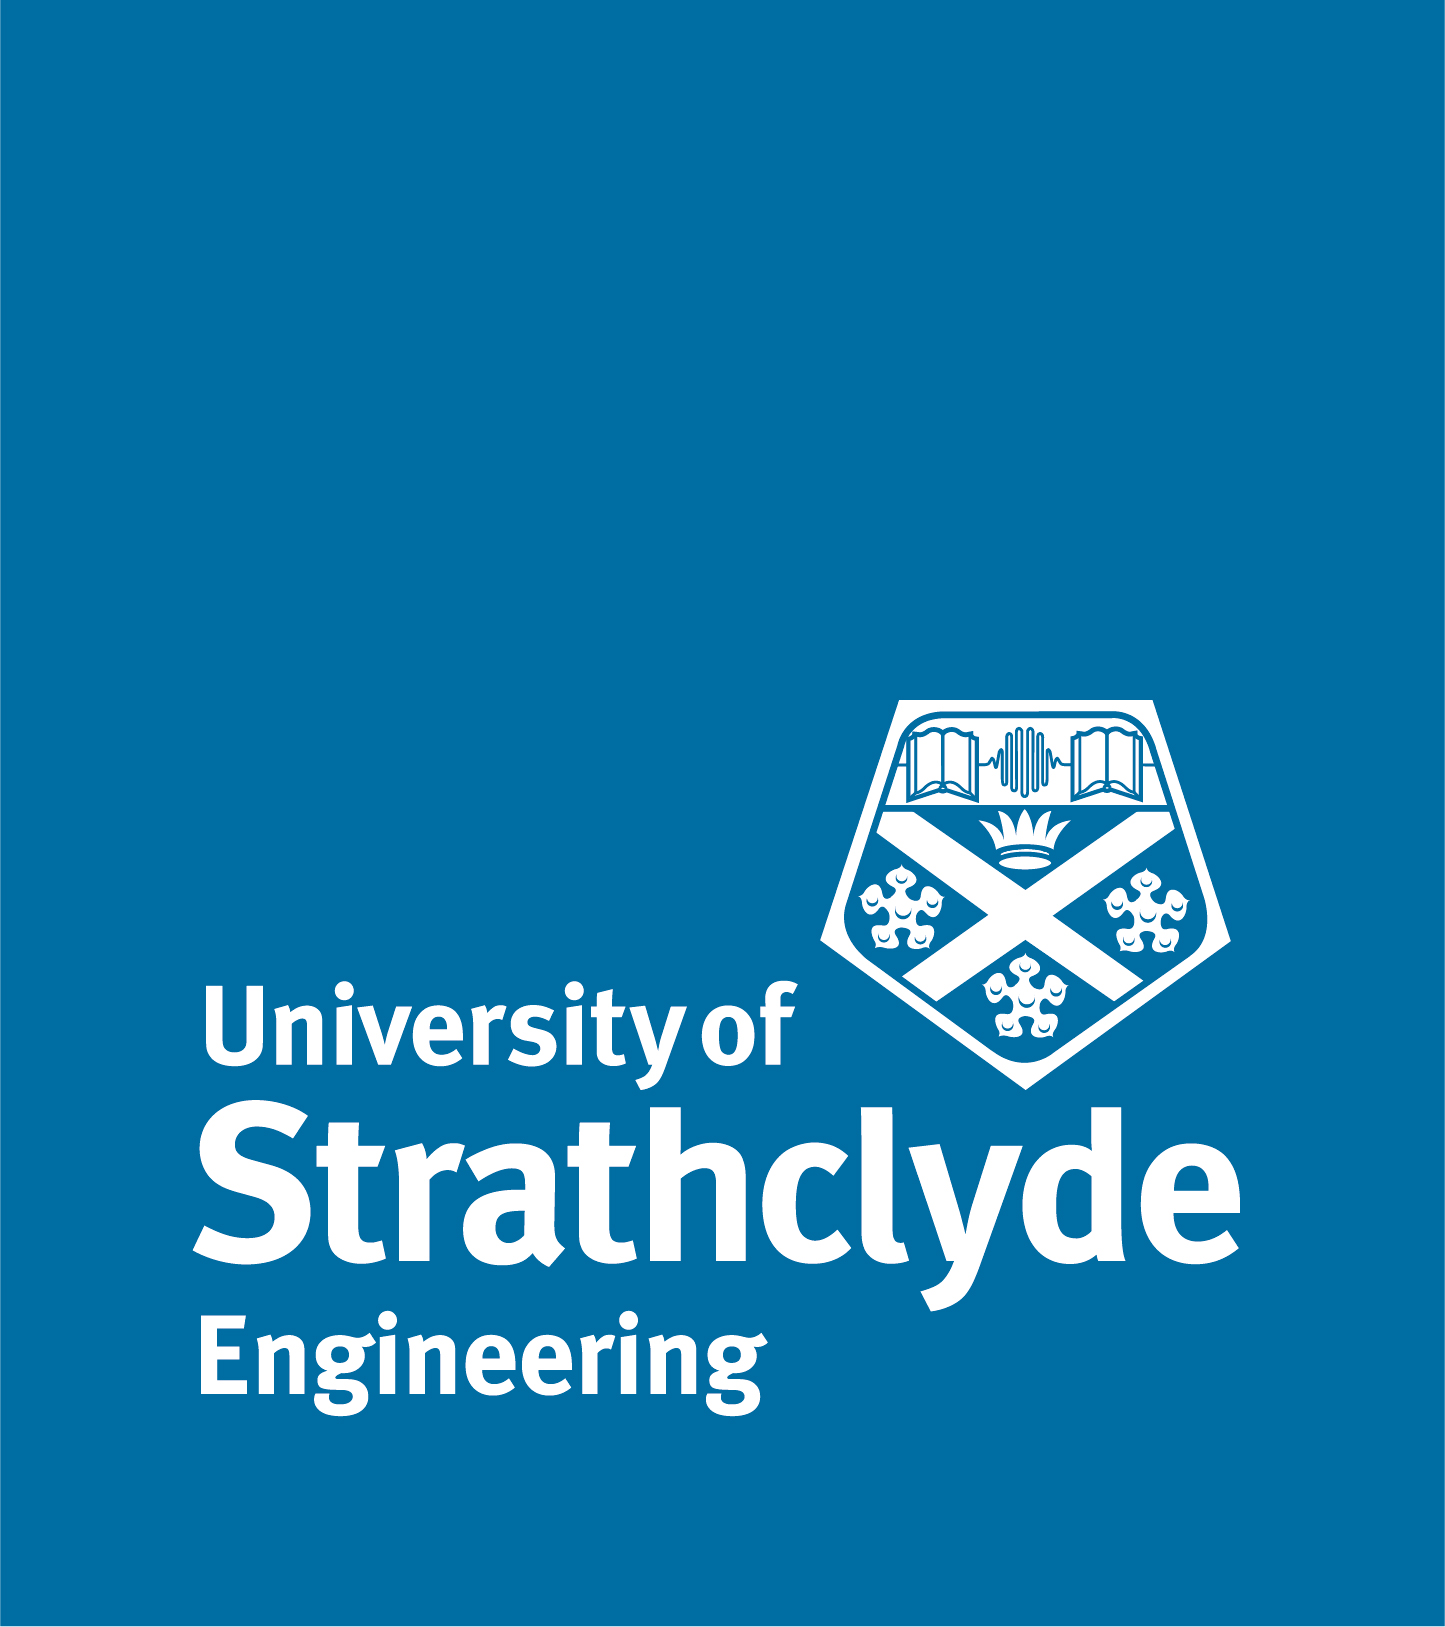 blue background with university logo and university of strathclyde engineering appearing in white